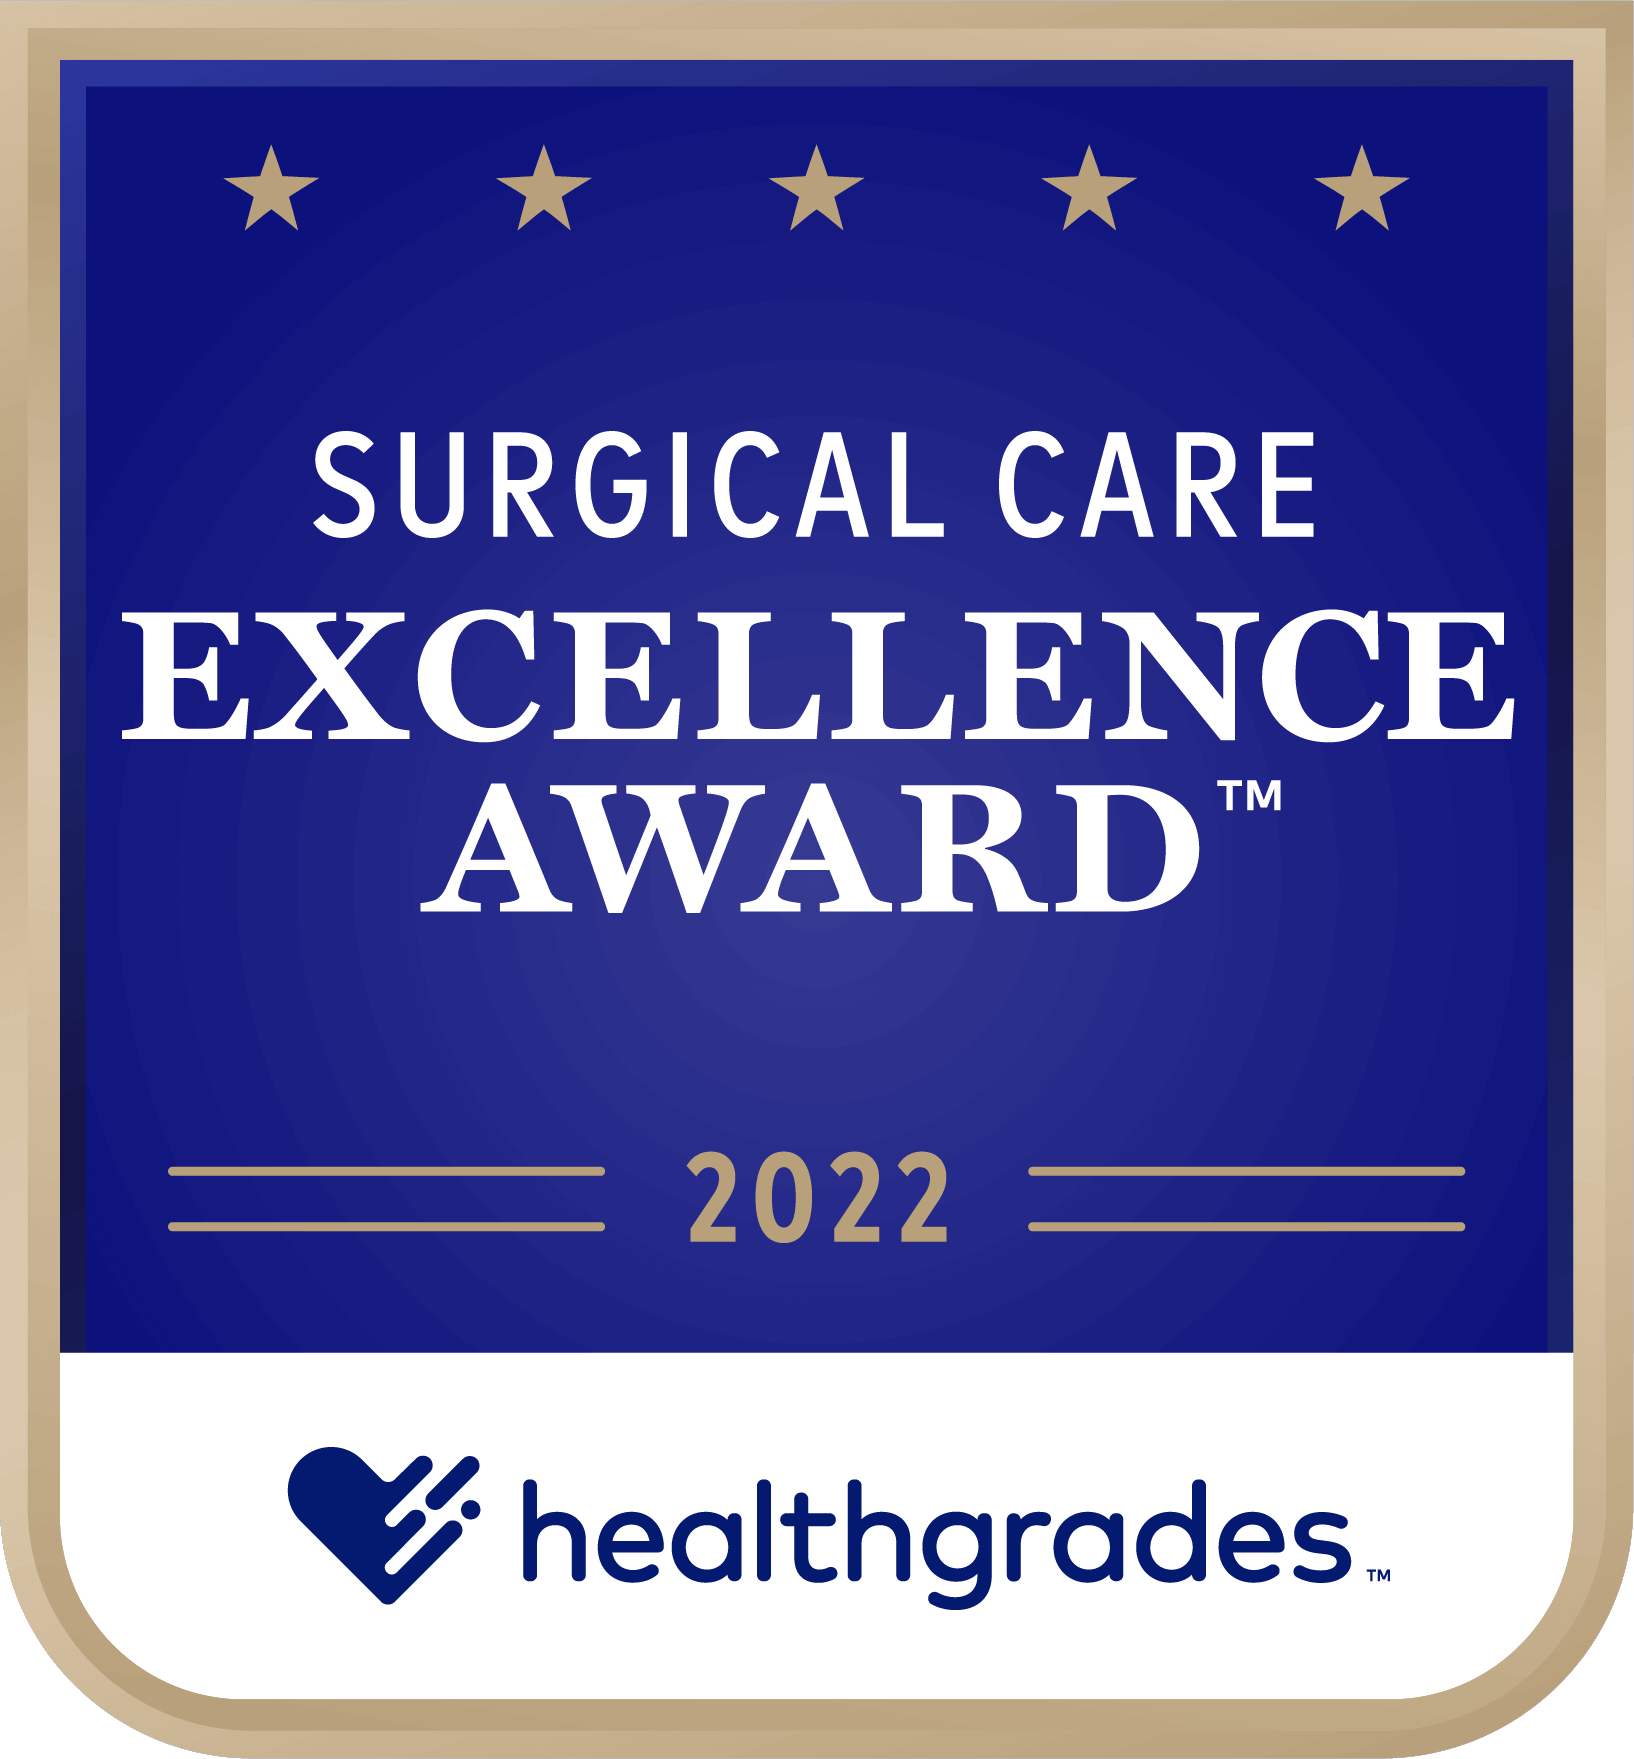 Surgical Care Excellence Award 2022